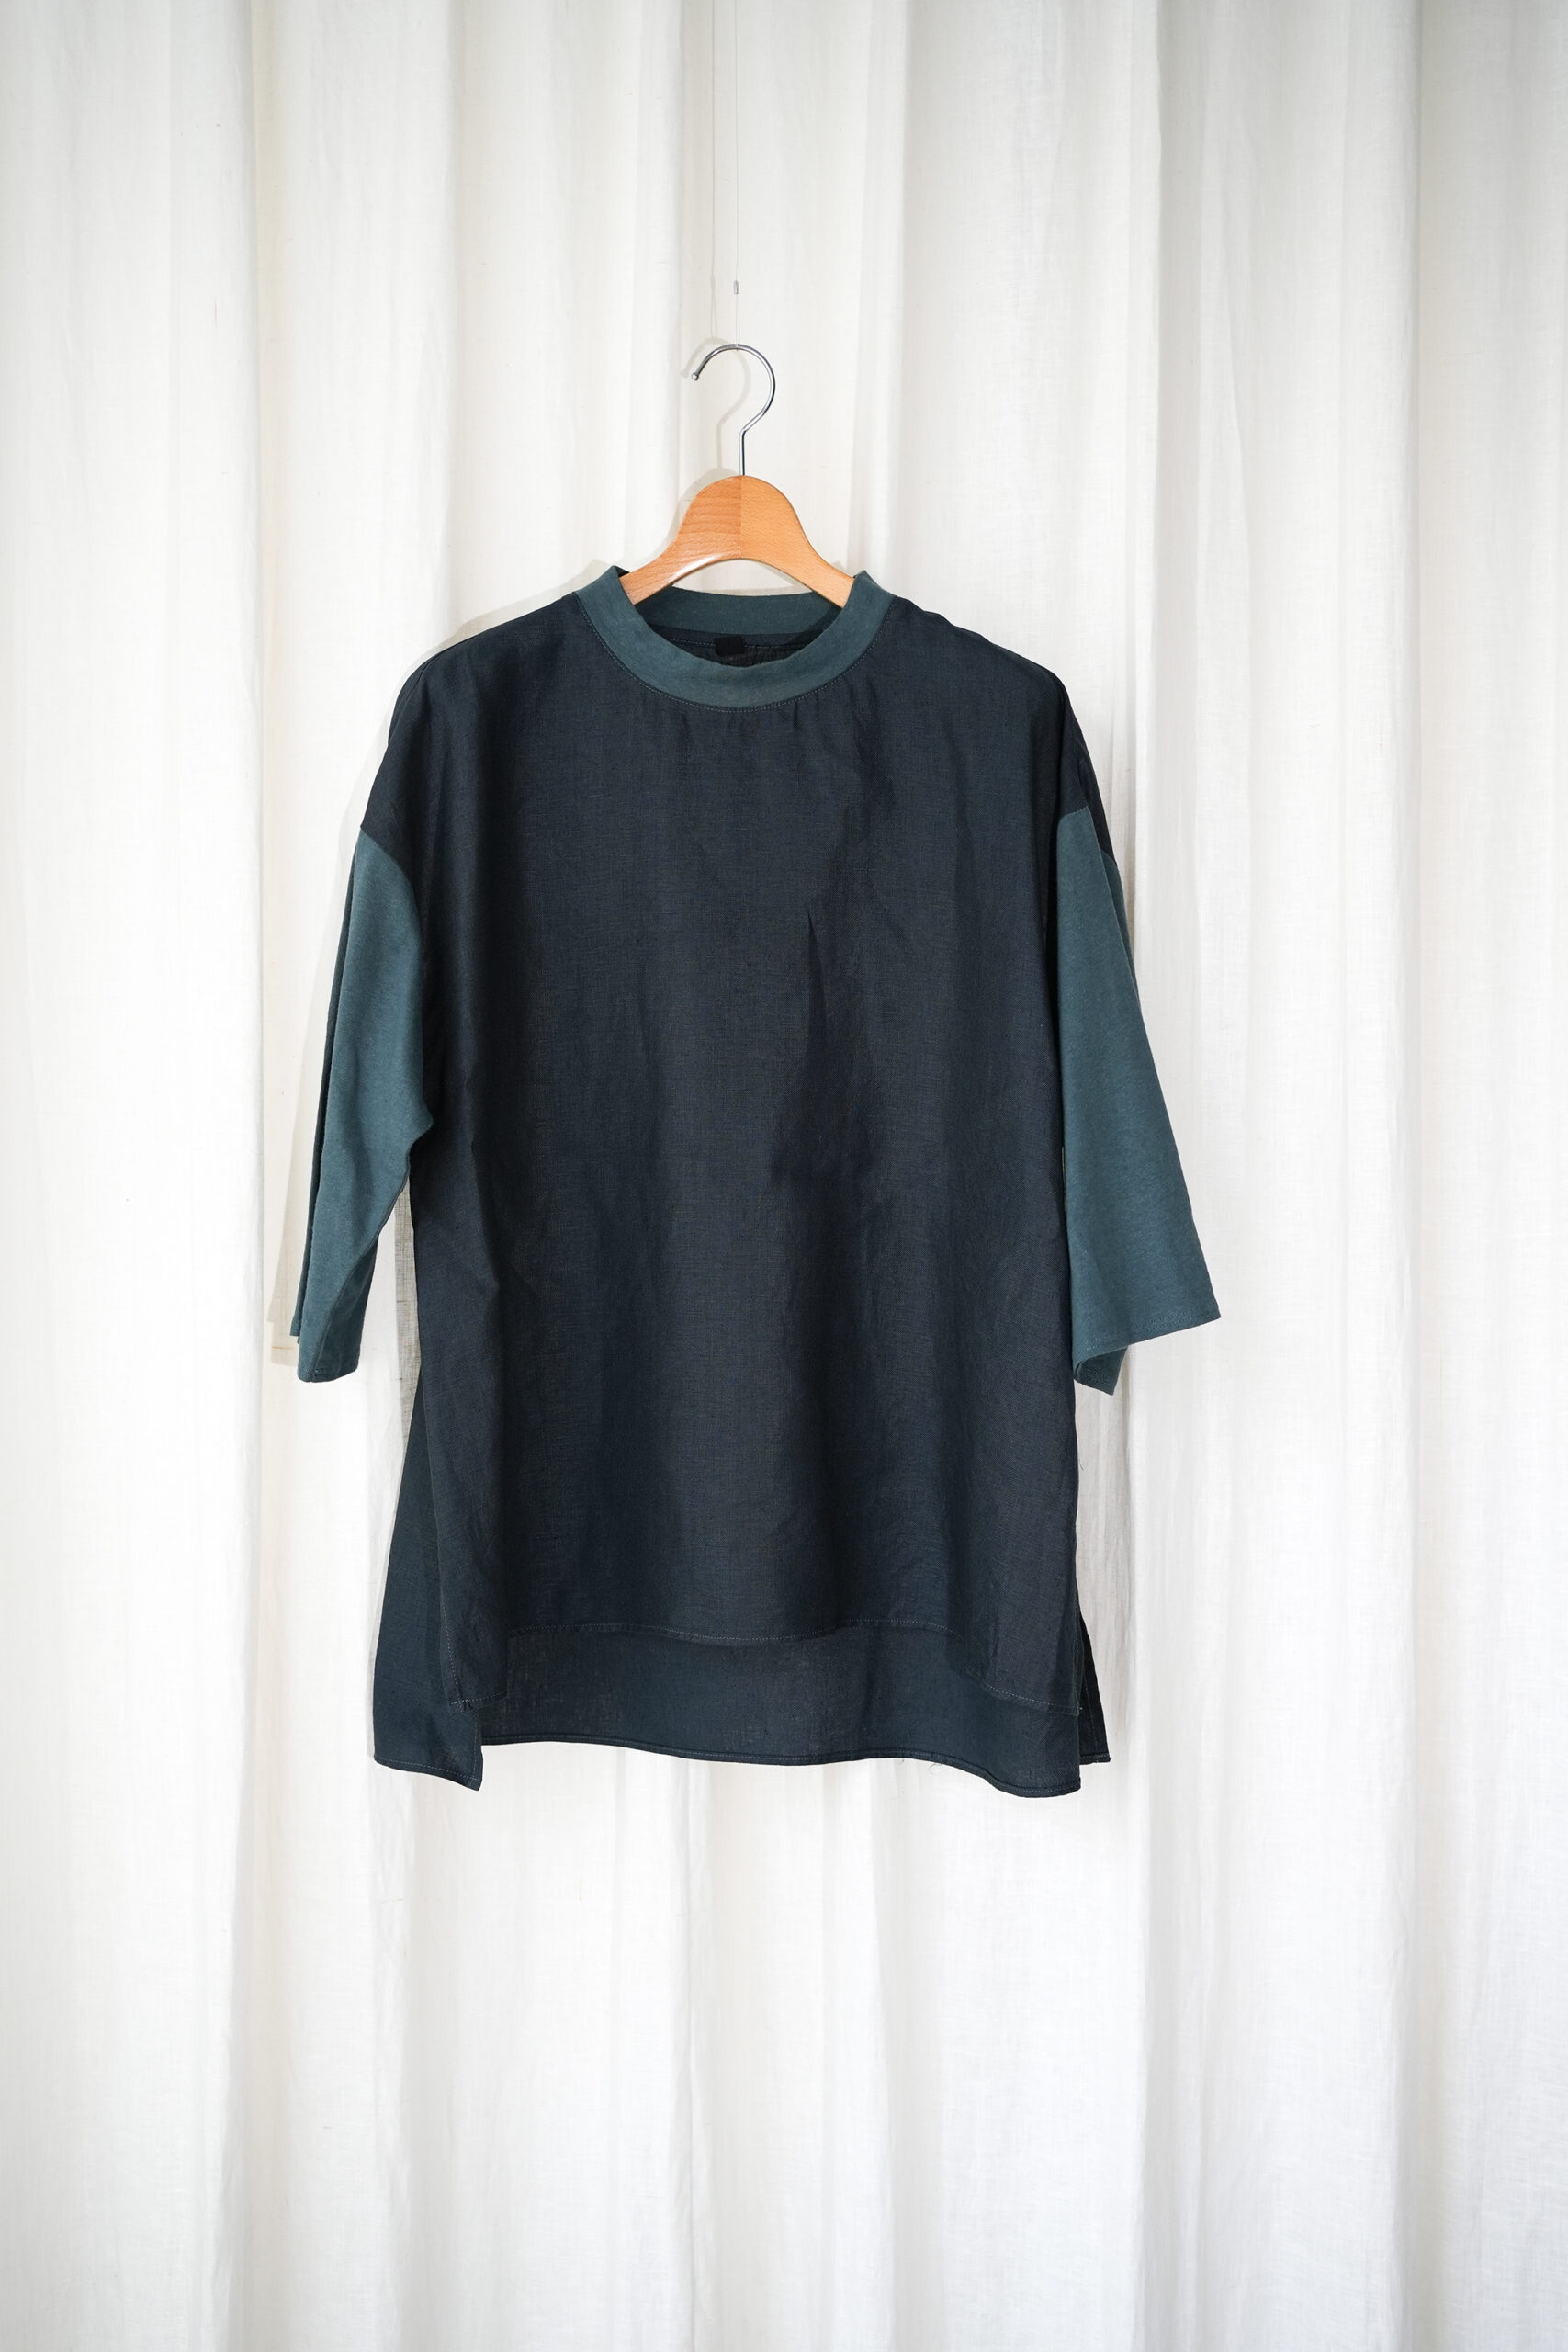 dyed combination pullover